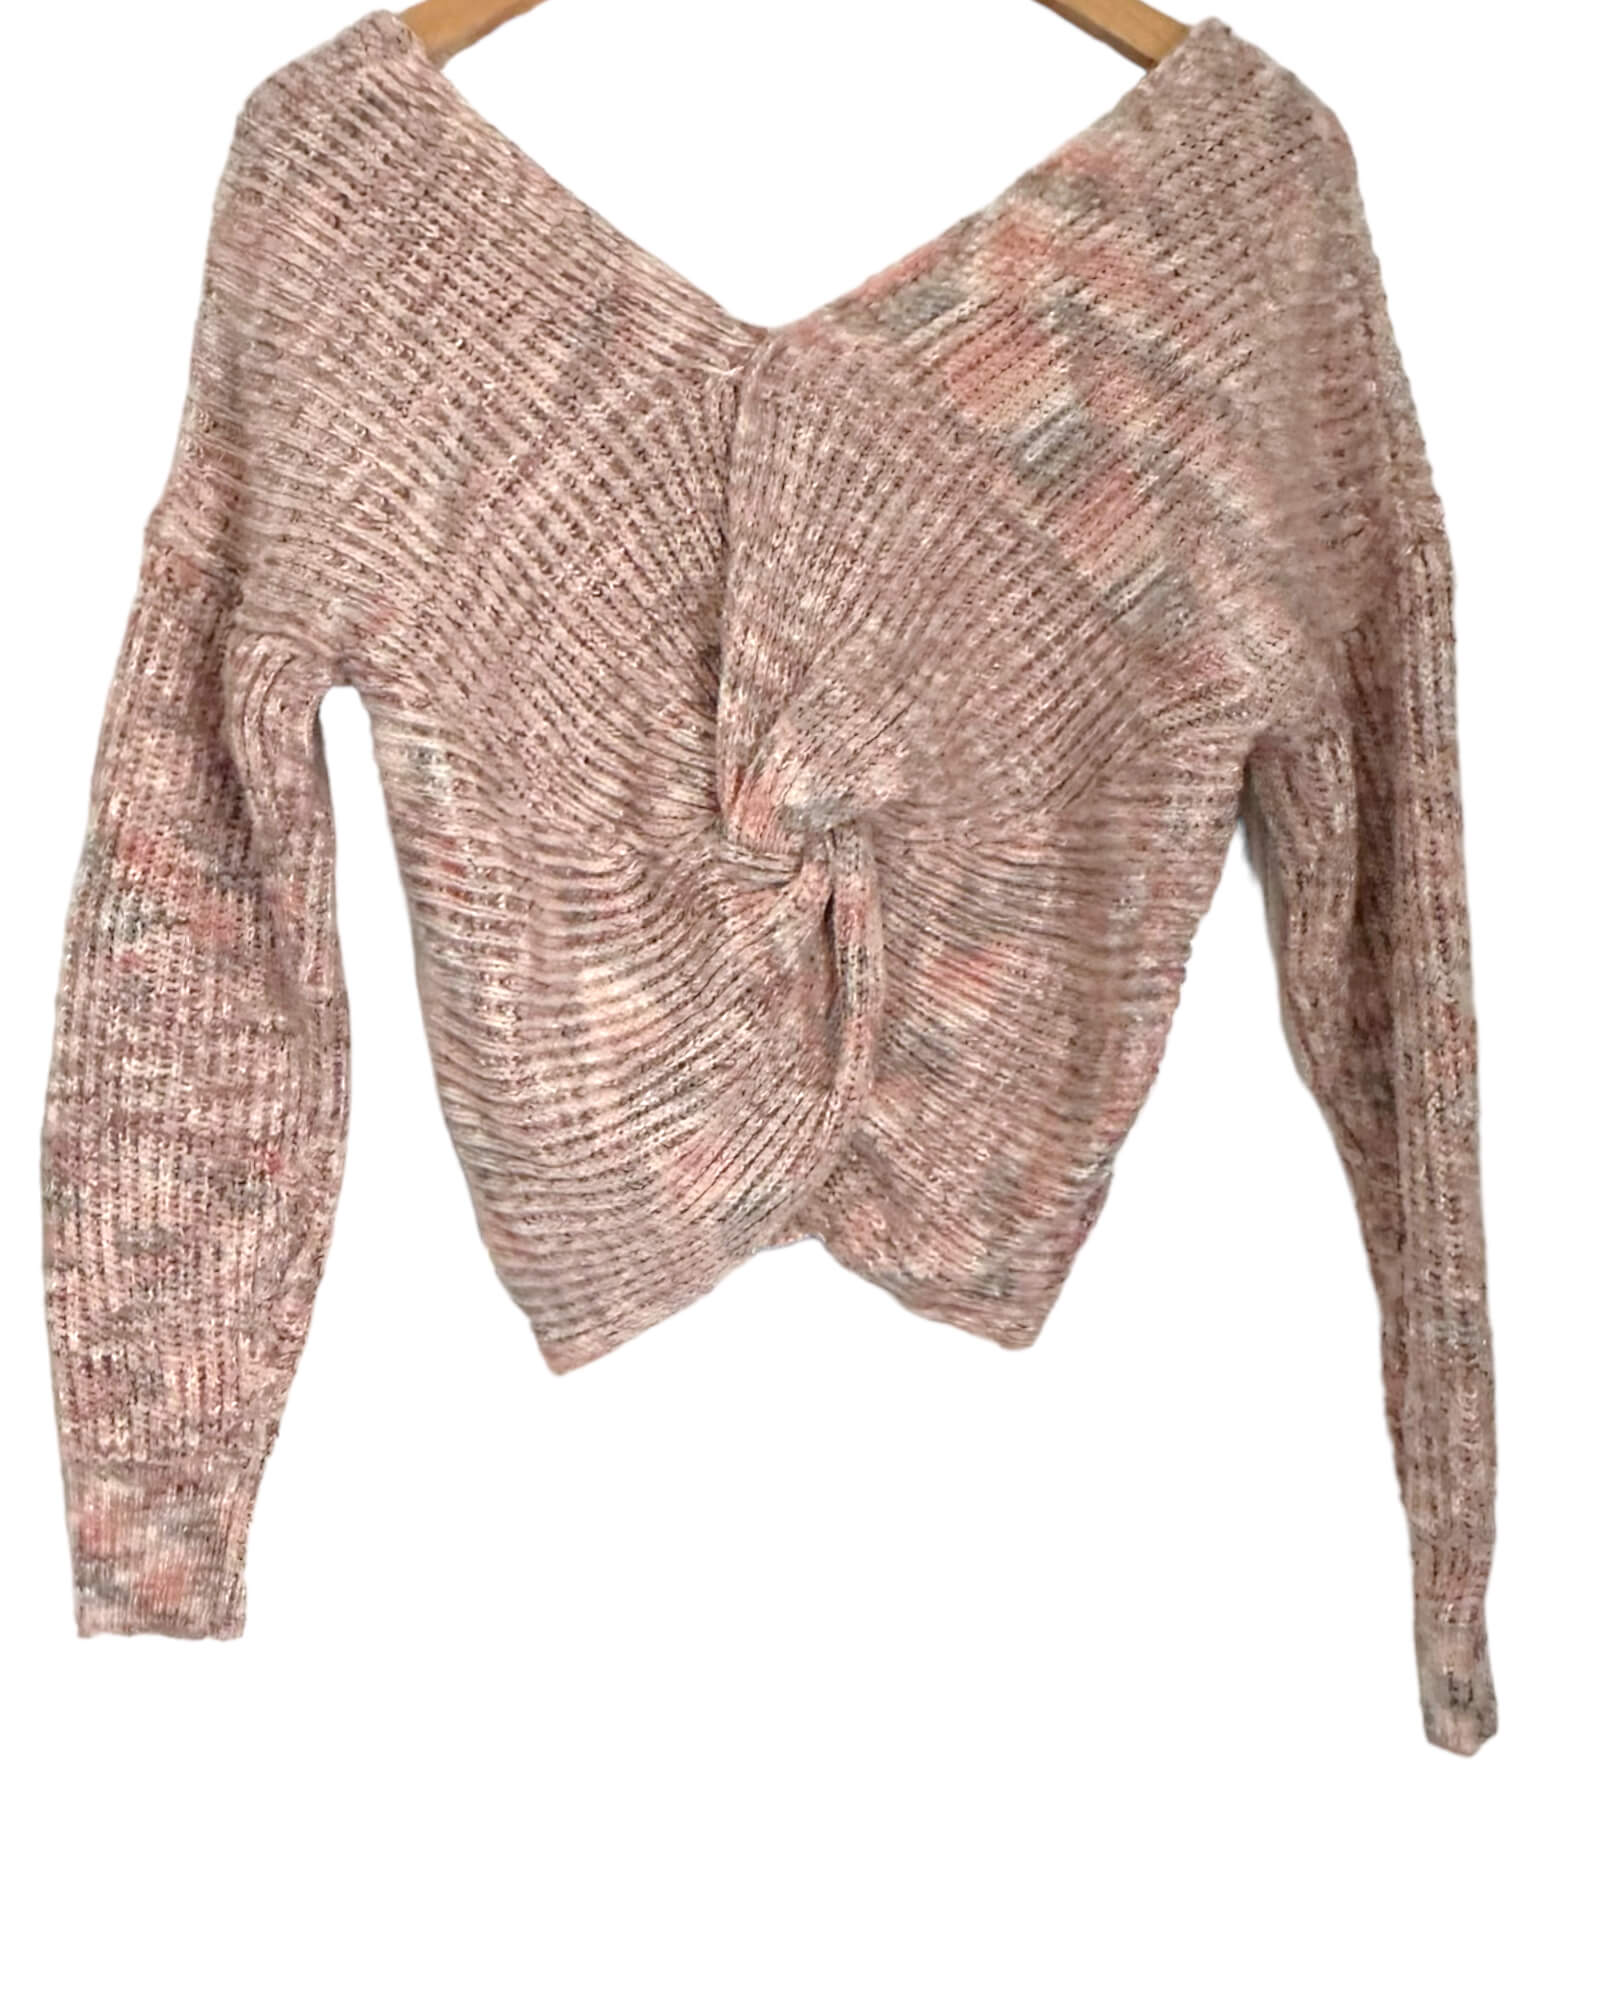 Soft Autumn AMERICAN RAG pink and gray marle twist back sweater